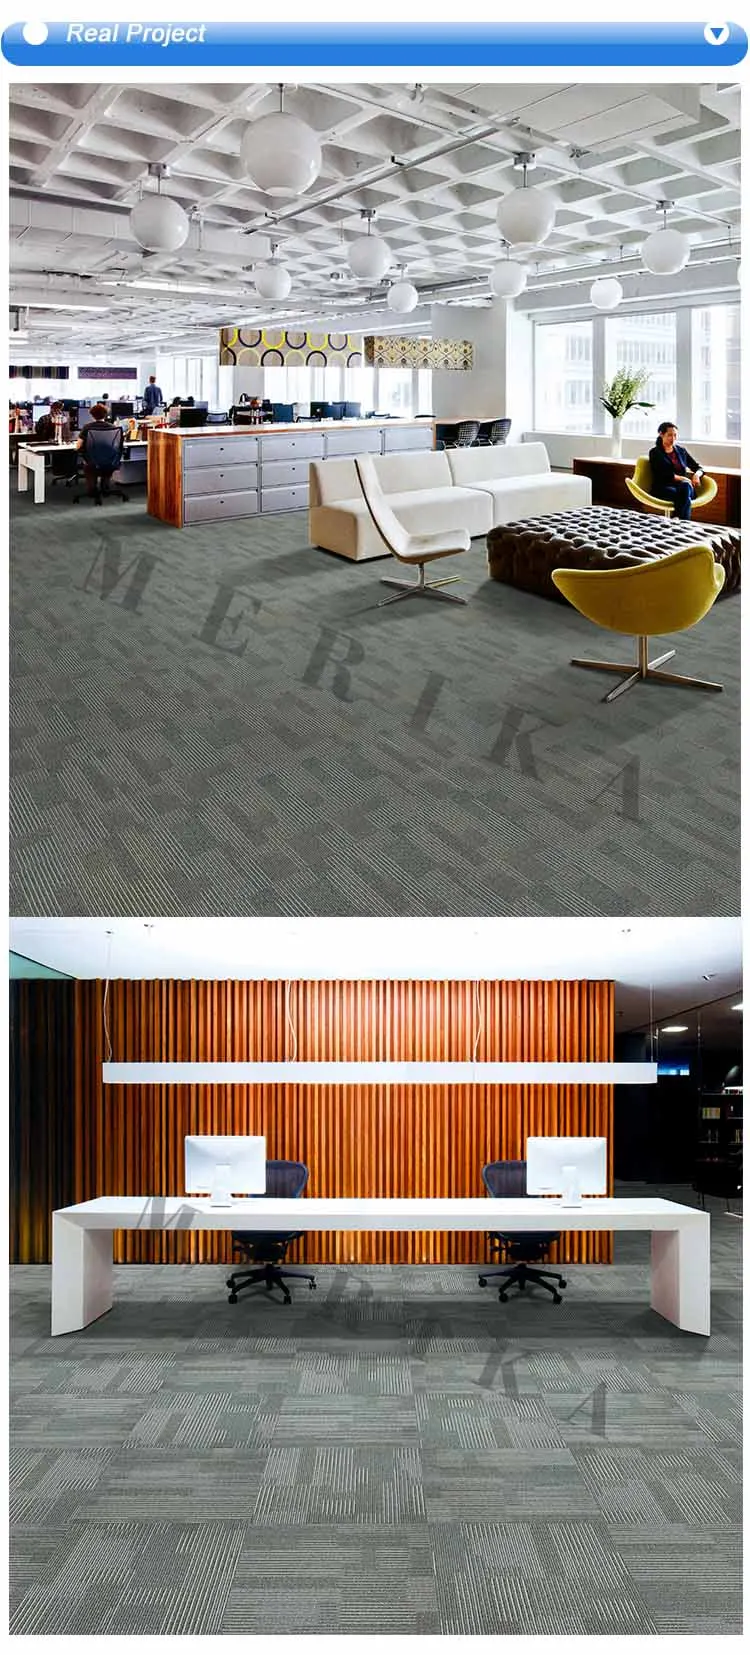 Merika Luxury Fire Resistant Pvc backing Removable Washable 60x60 Floor Carpet Tile For Office